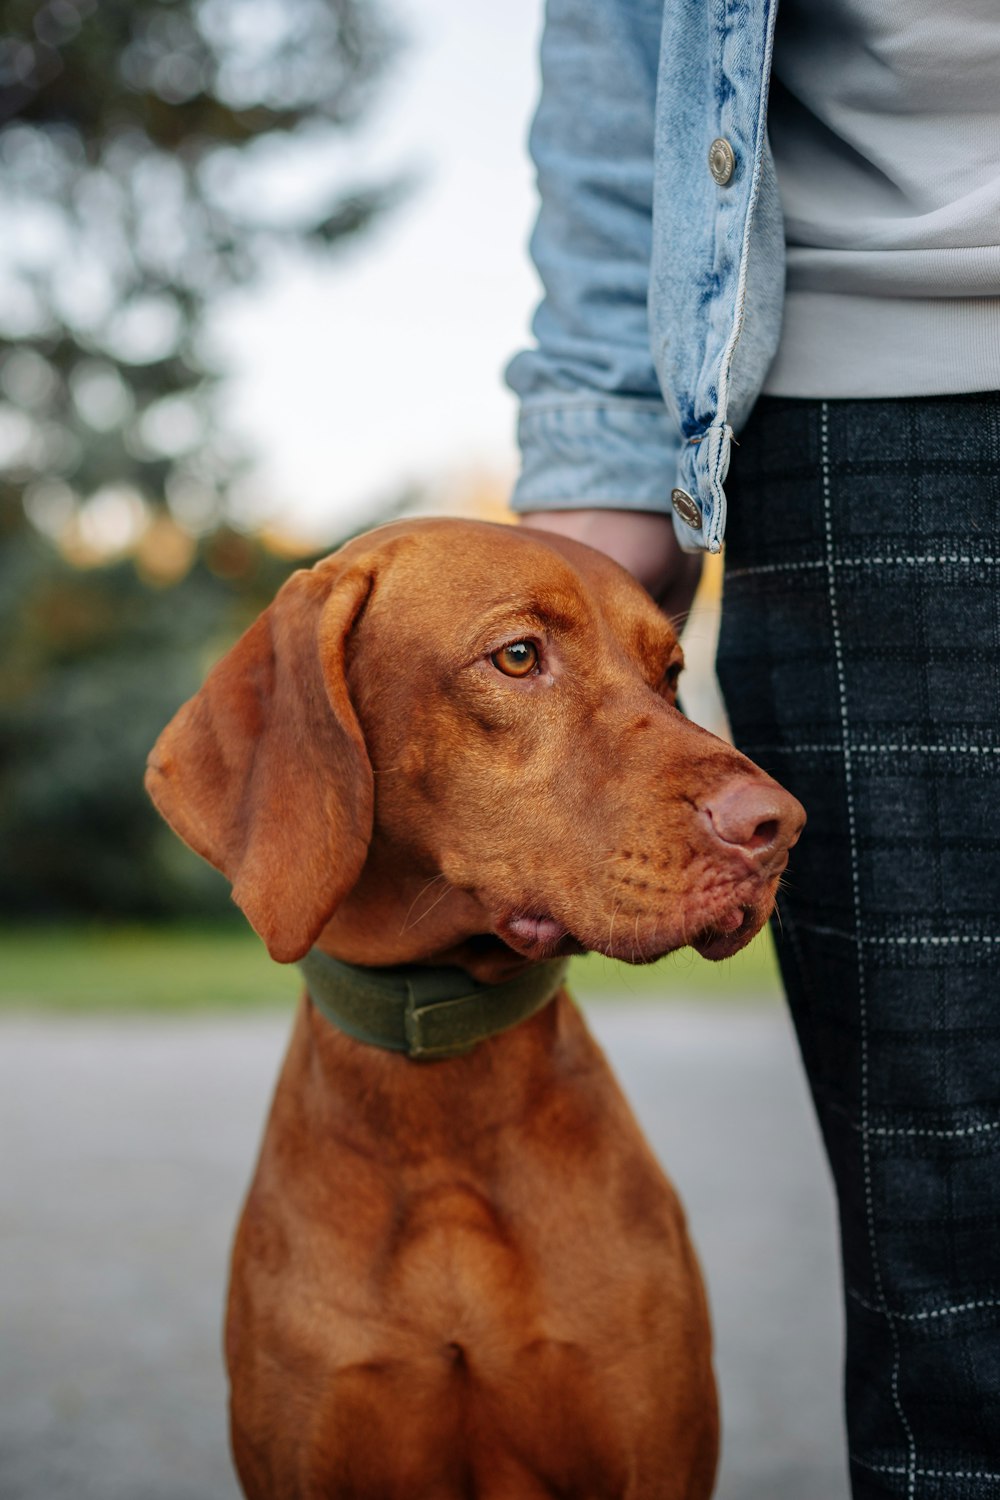 a brown dog standing next to a person